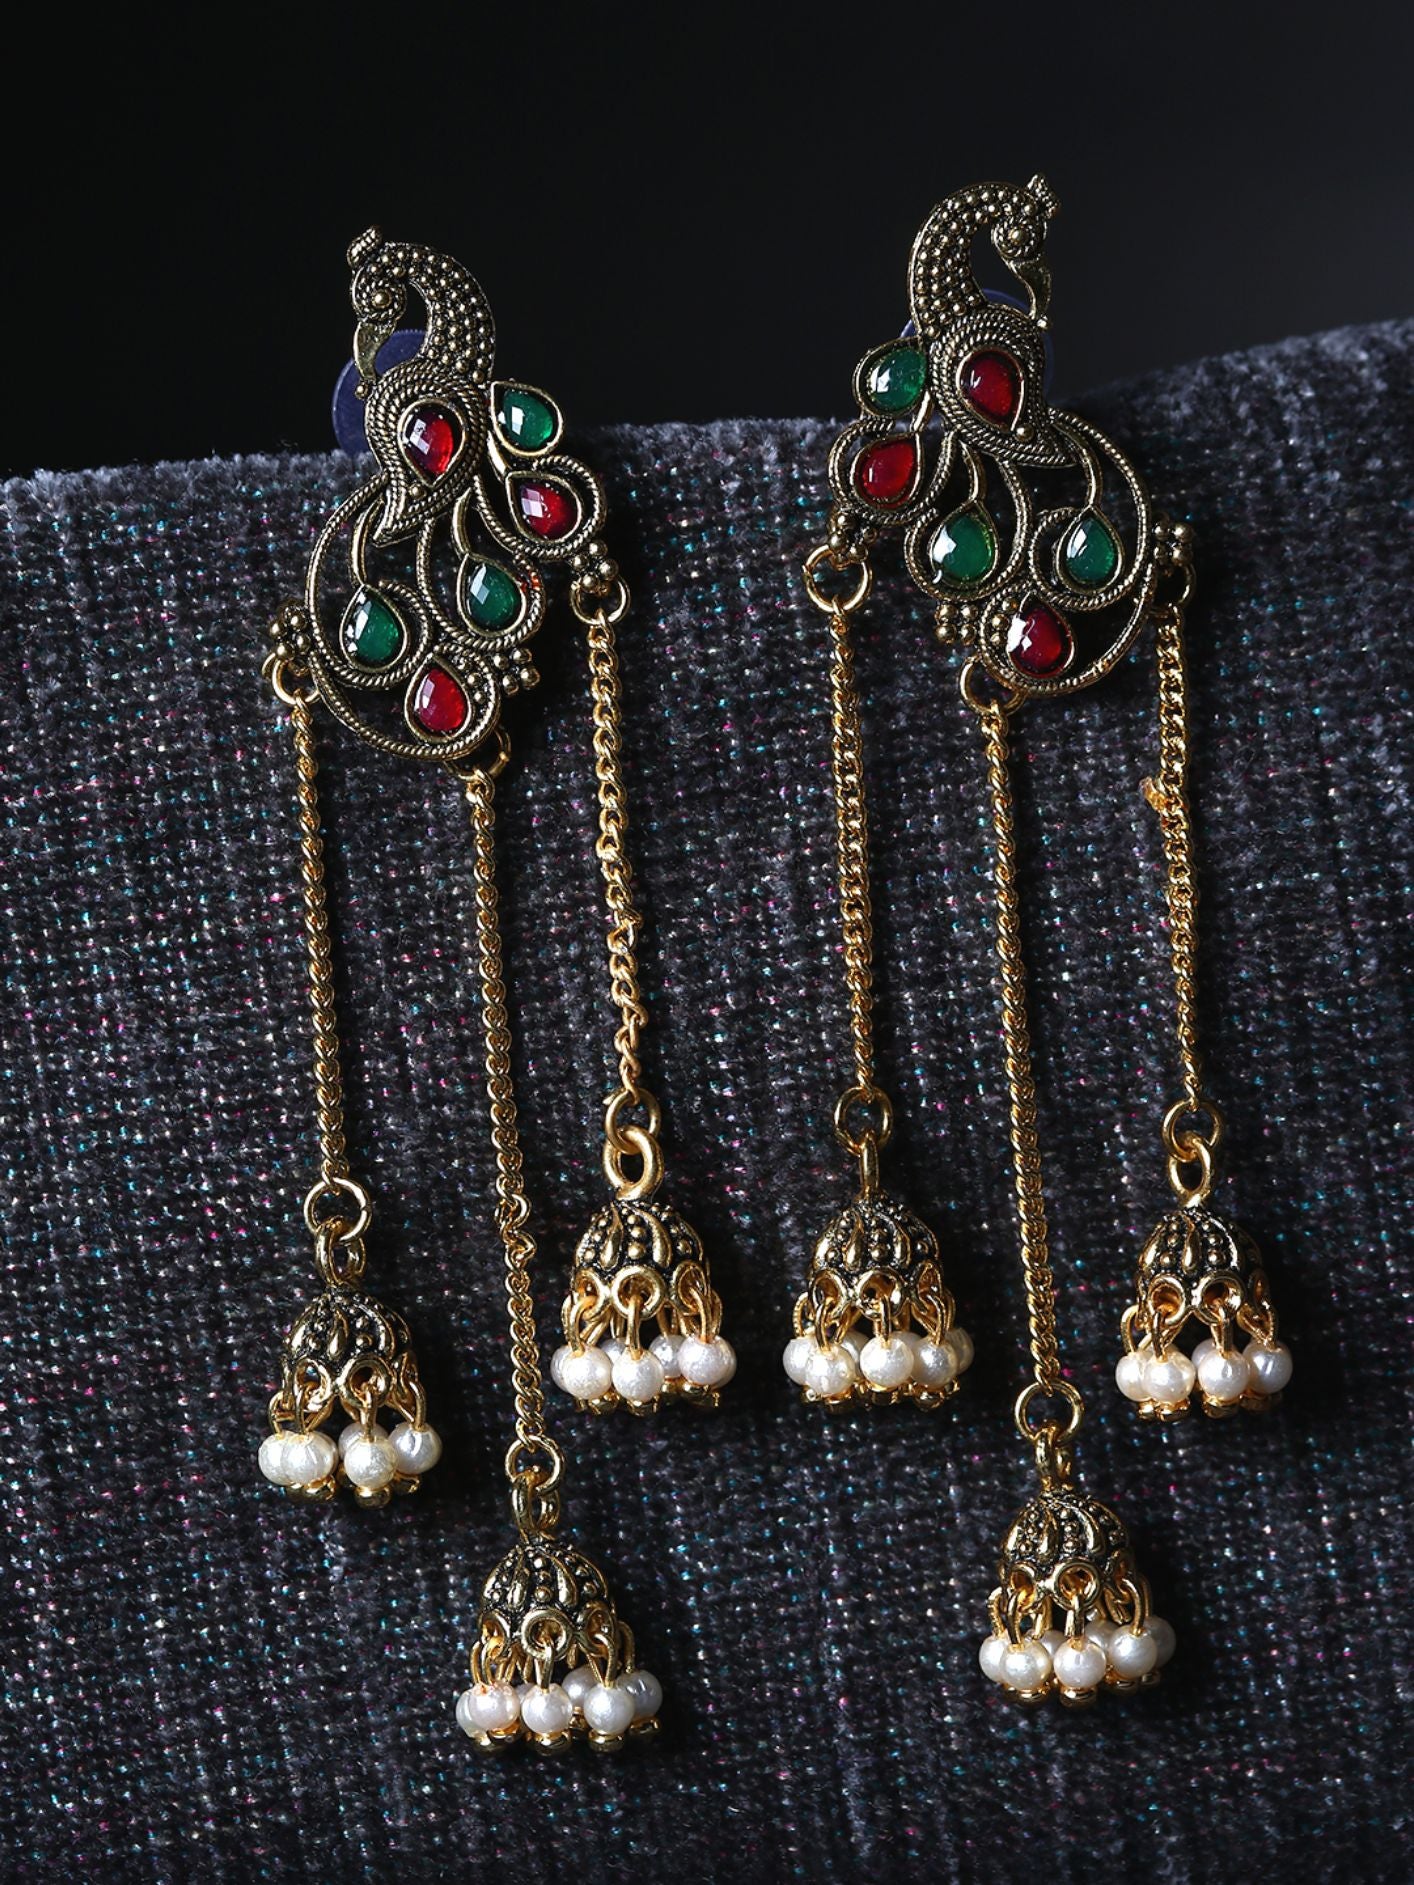 Women's Gold Plated & Red Enamelled Peacock Shaped Drop Earrings - Anikas Creation